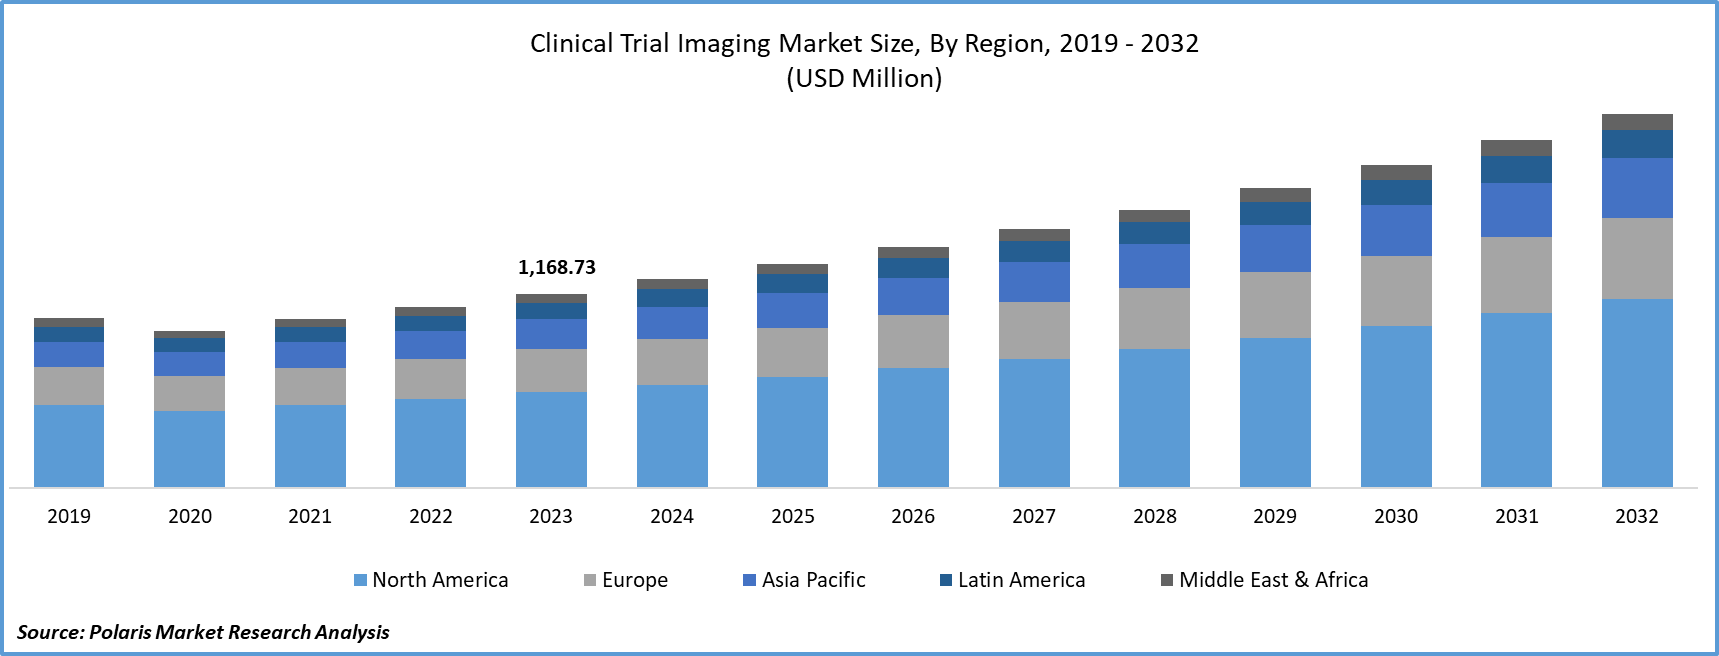 Clinical Trial Imaging Market Size